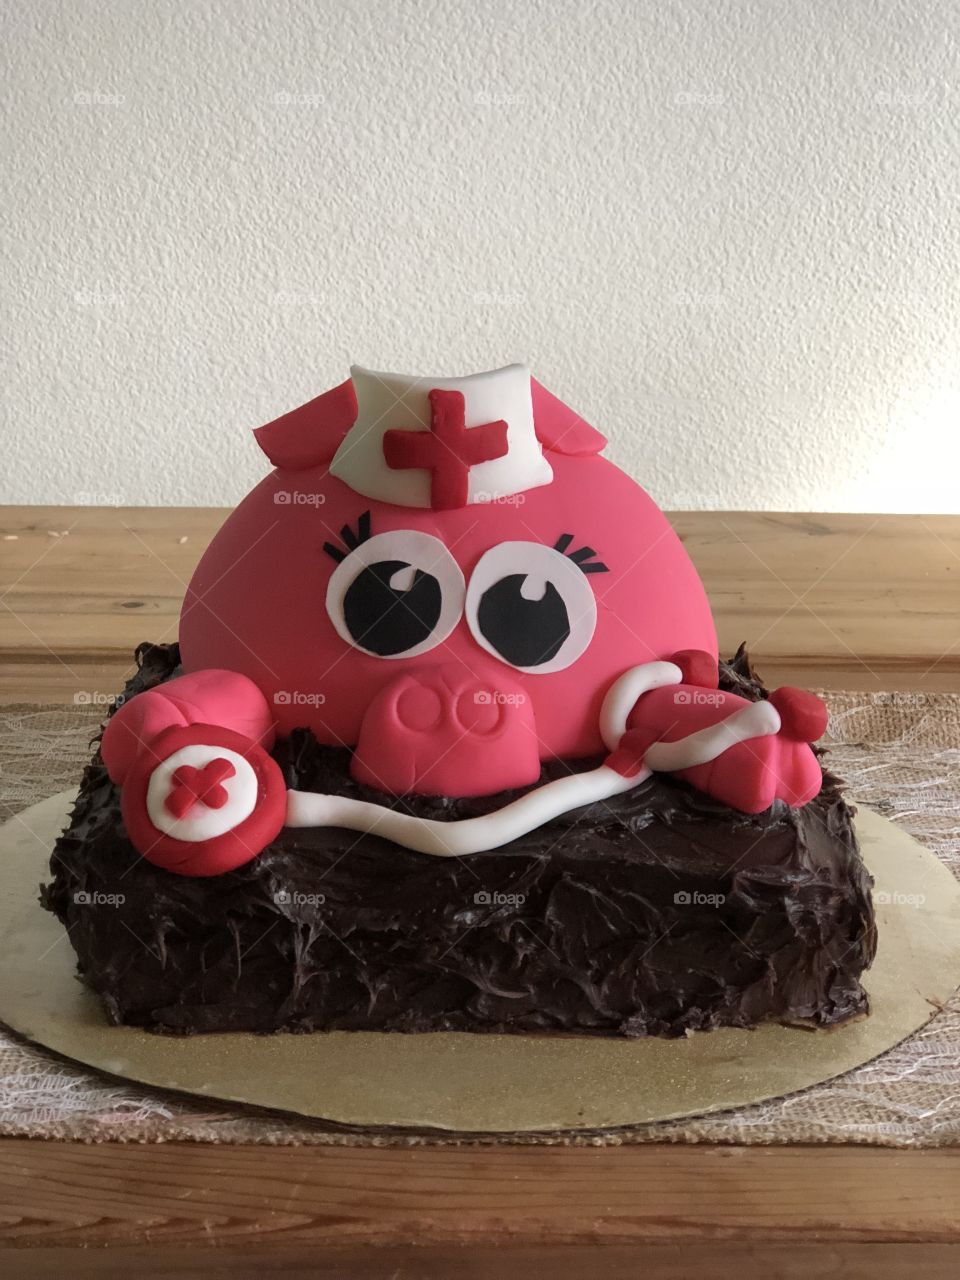 The cake, to the camera, to our local nurses